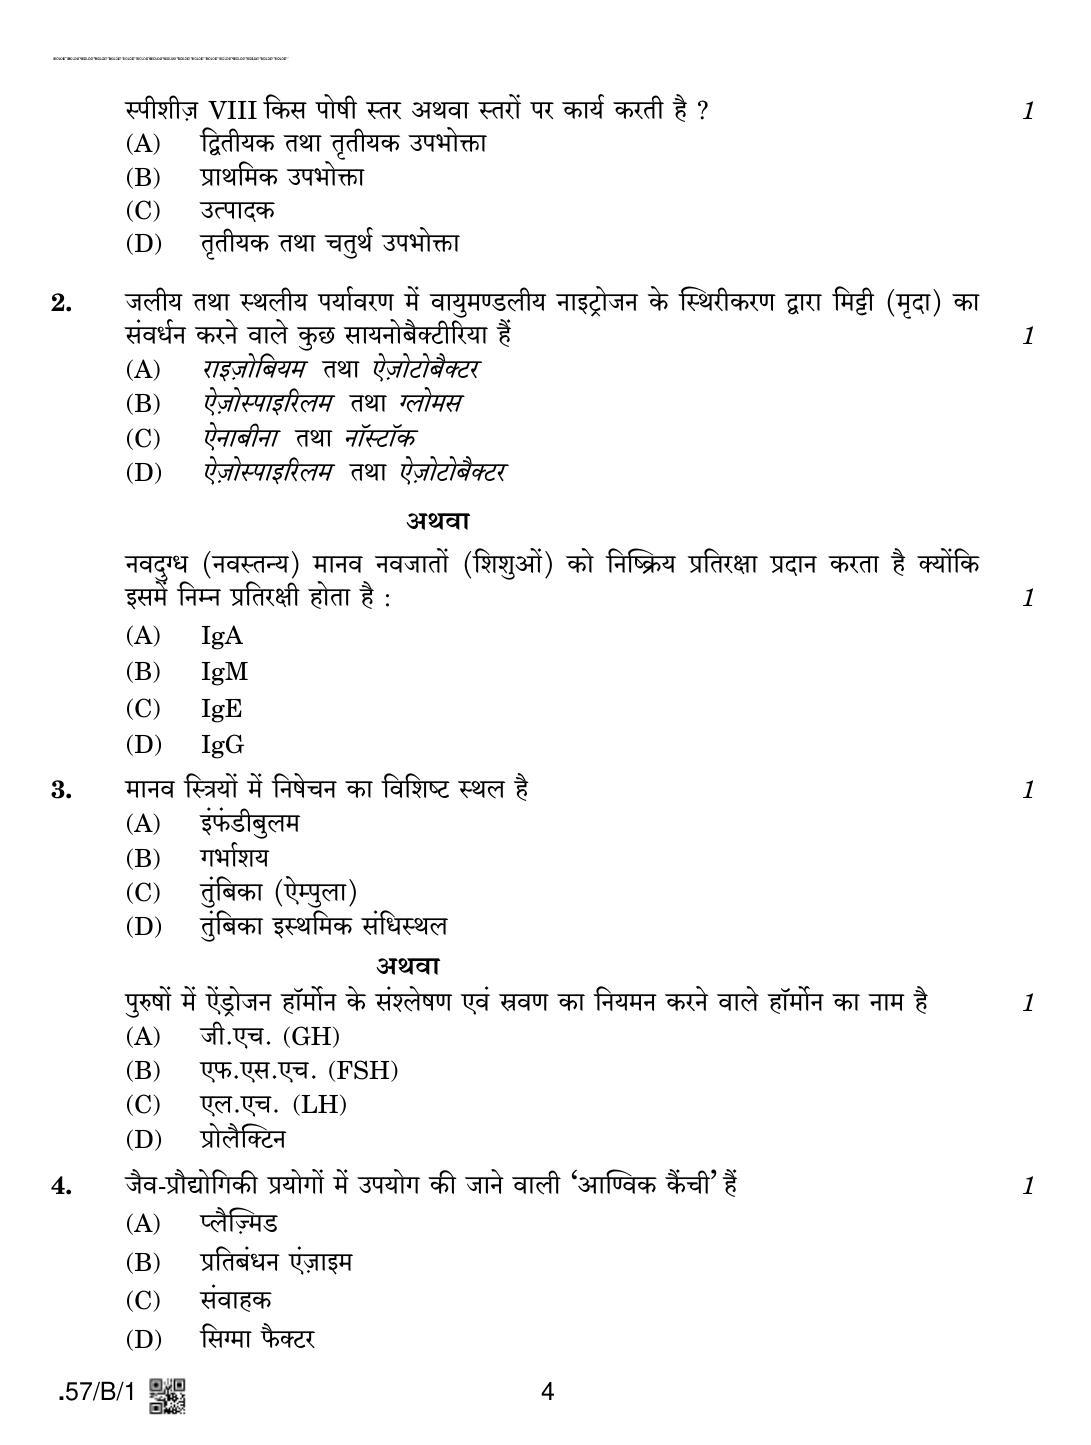 CBSE Class 12 57-C-1 - Biology 2020 Compartment Question Paper - Page 4